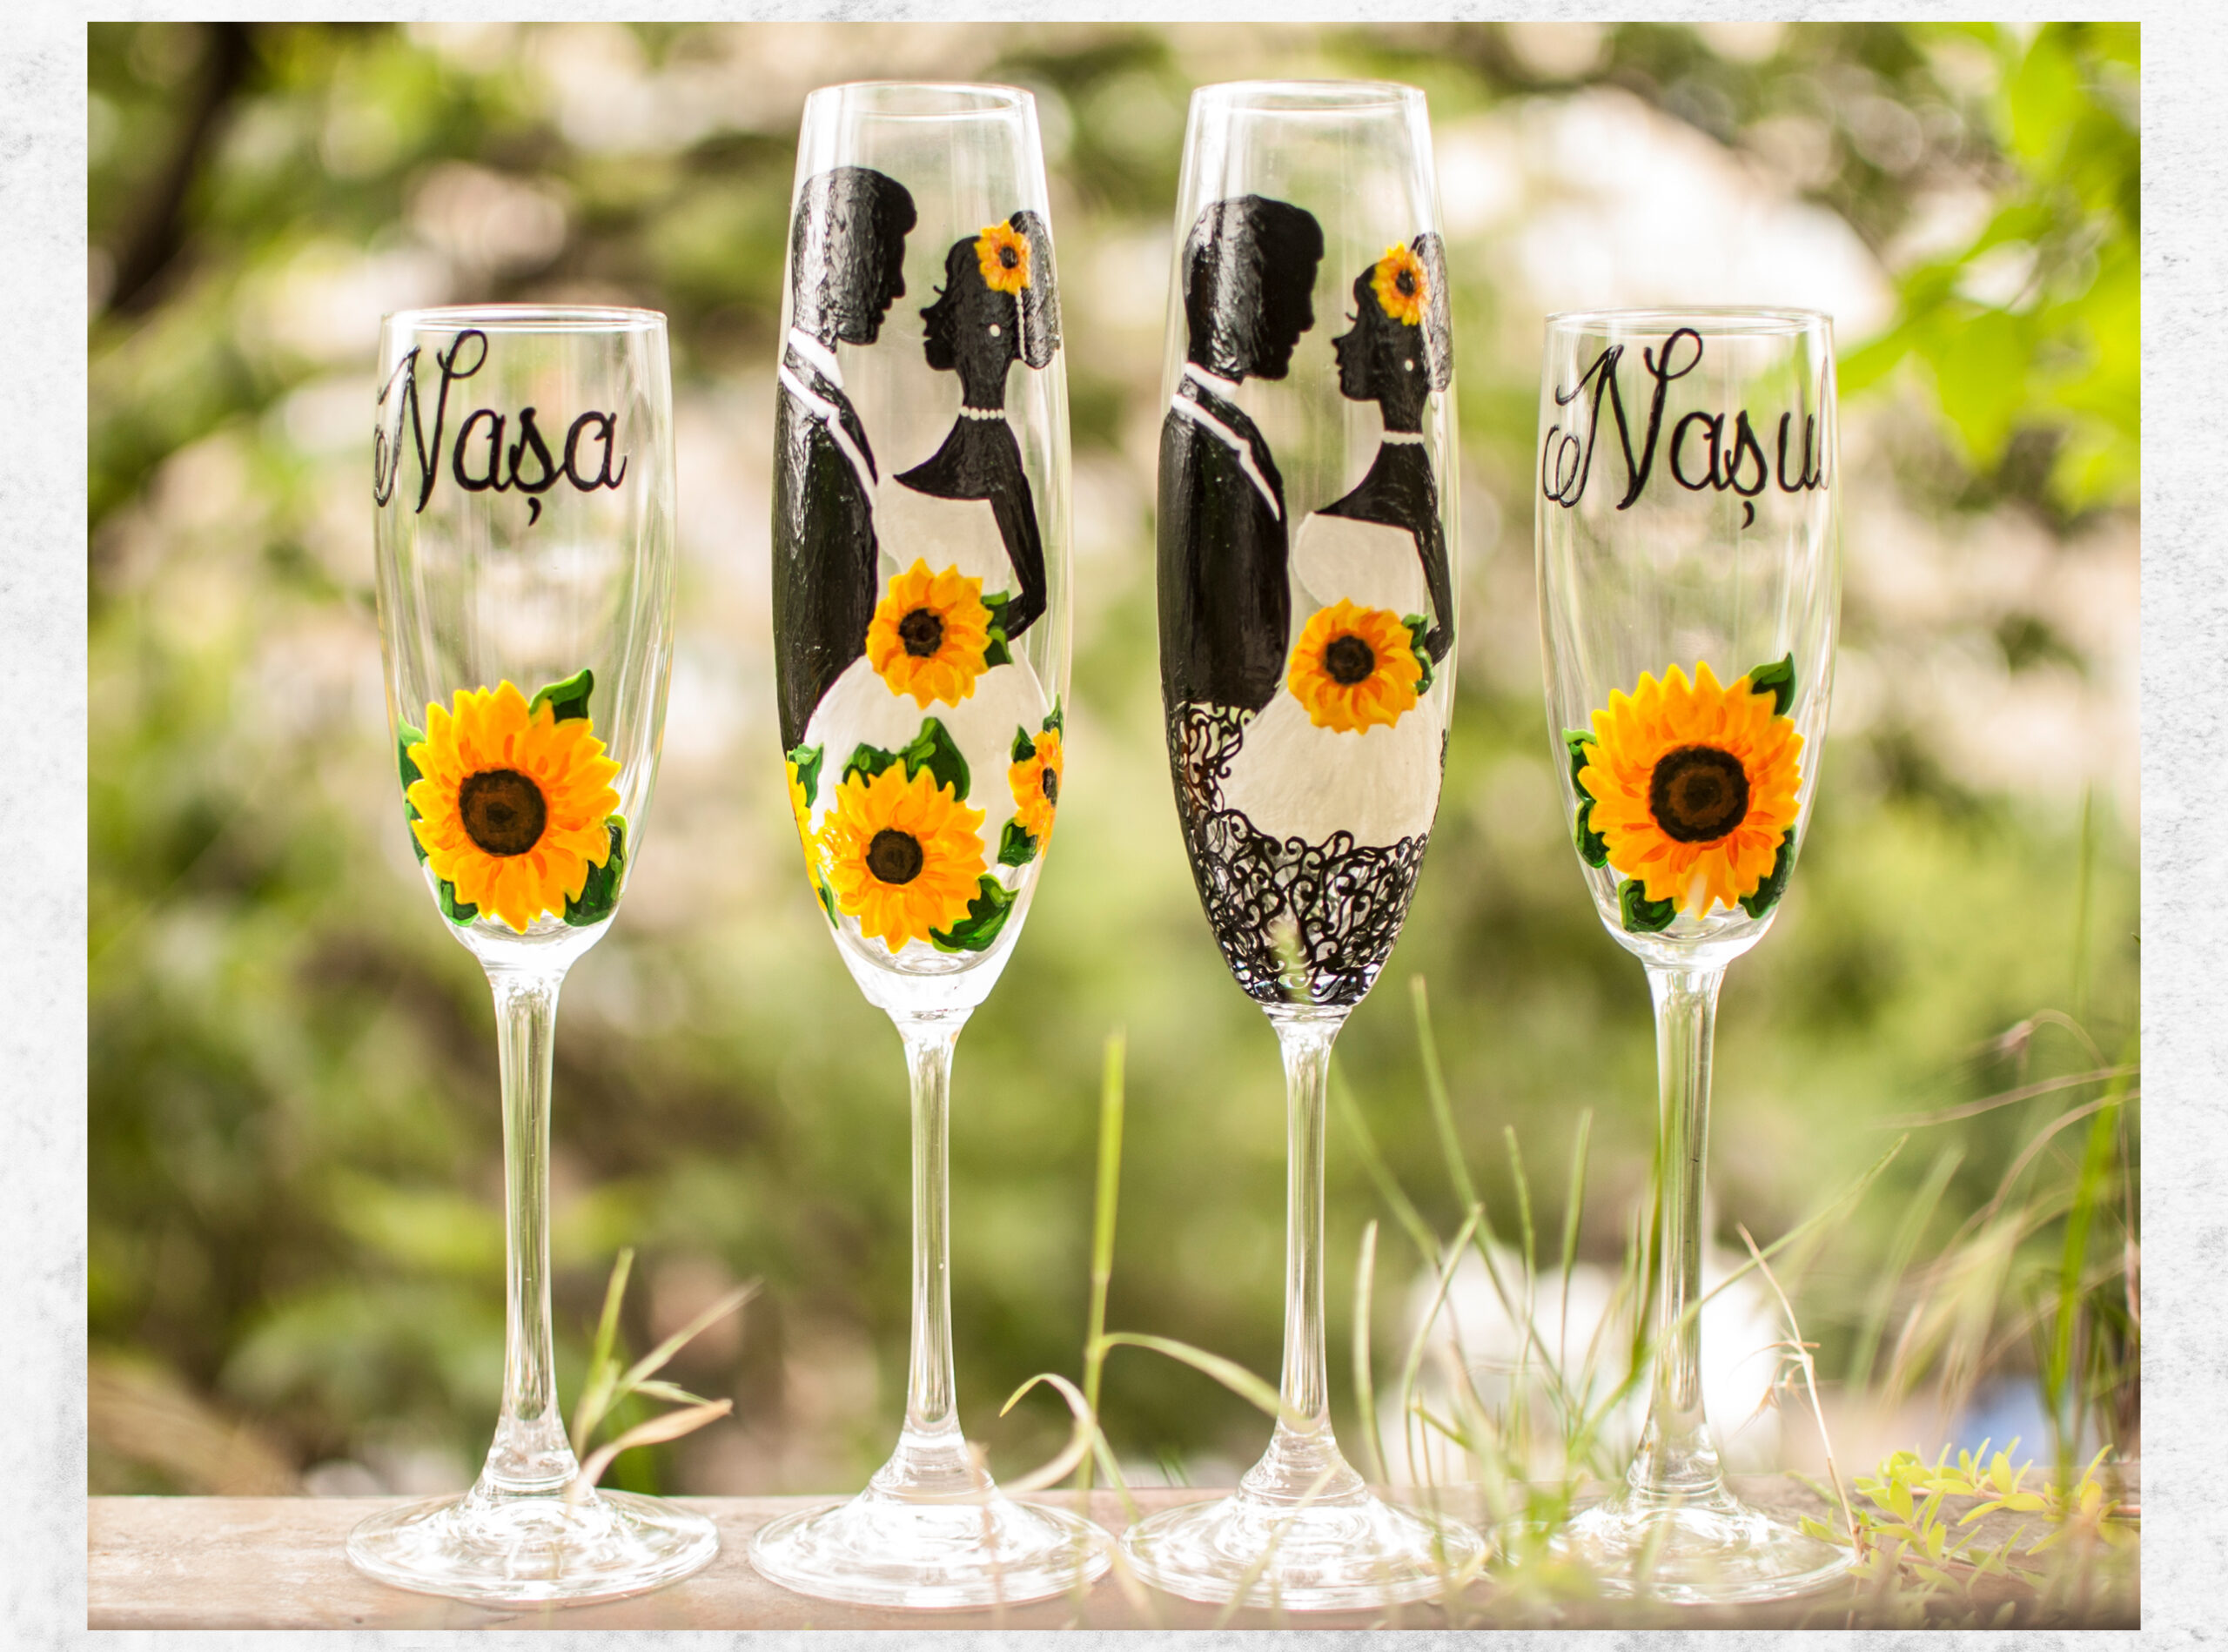 Sunflower painted on bride and groom wedding glasses and silhouetts Sunflower painted on Godmother and God father glasses